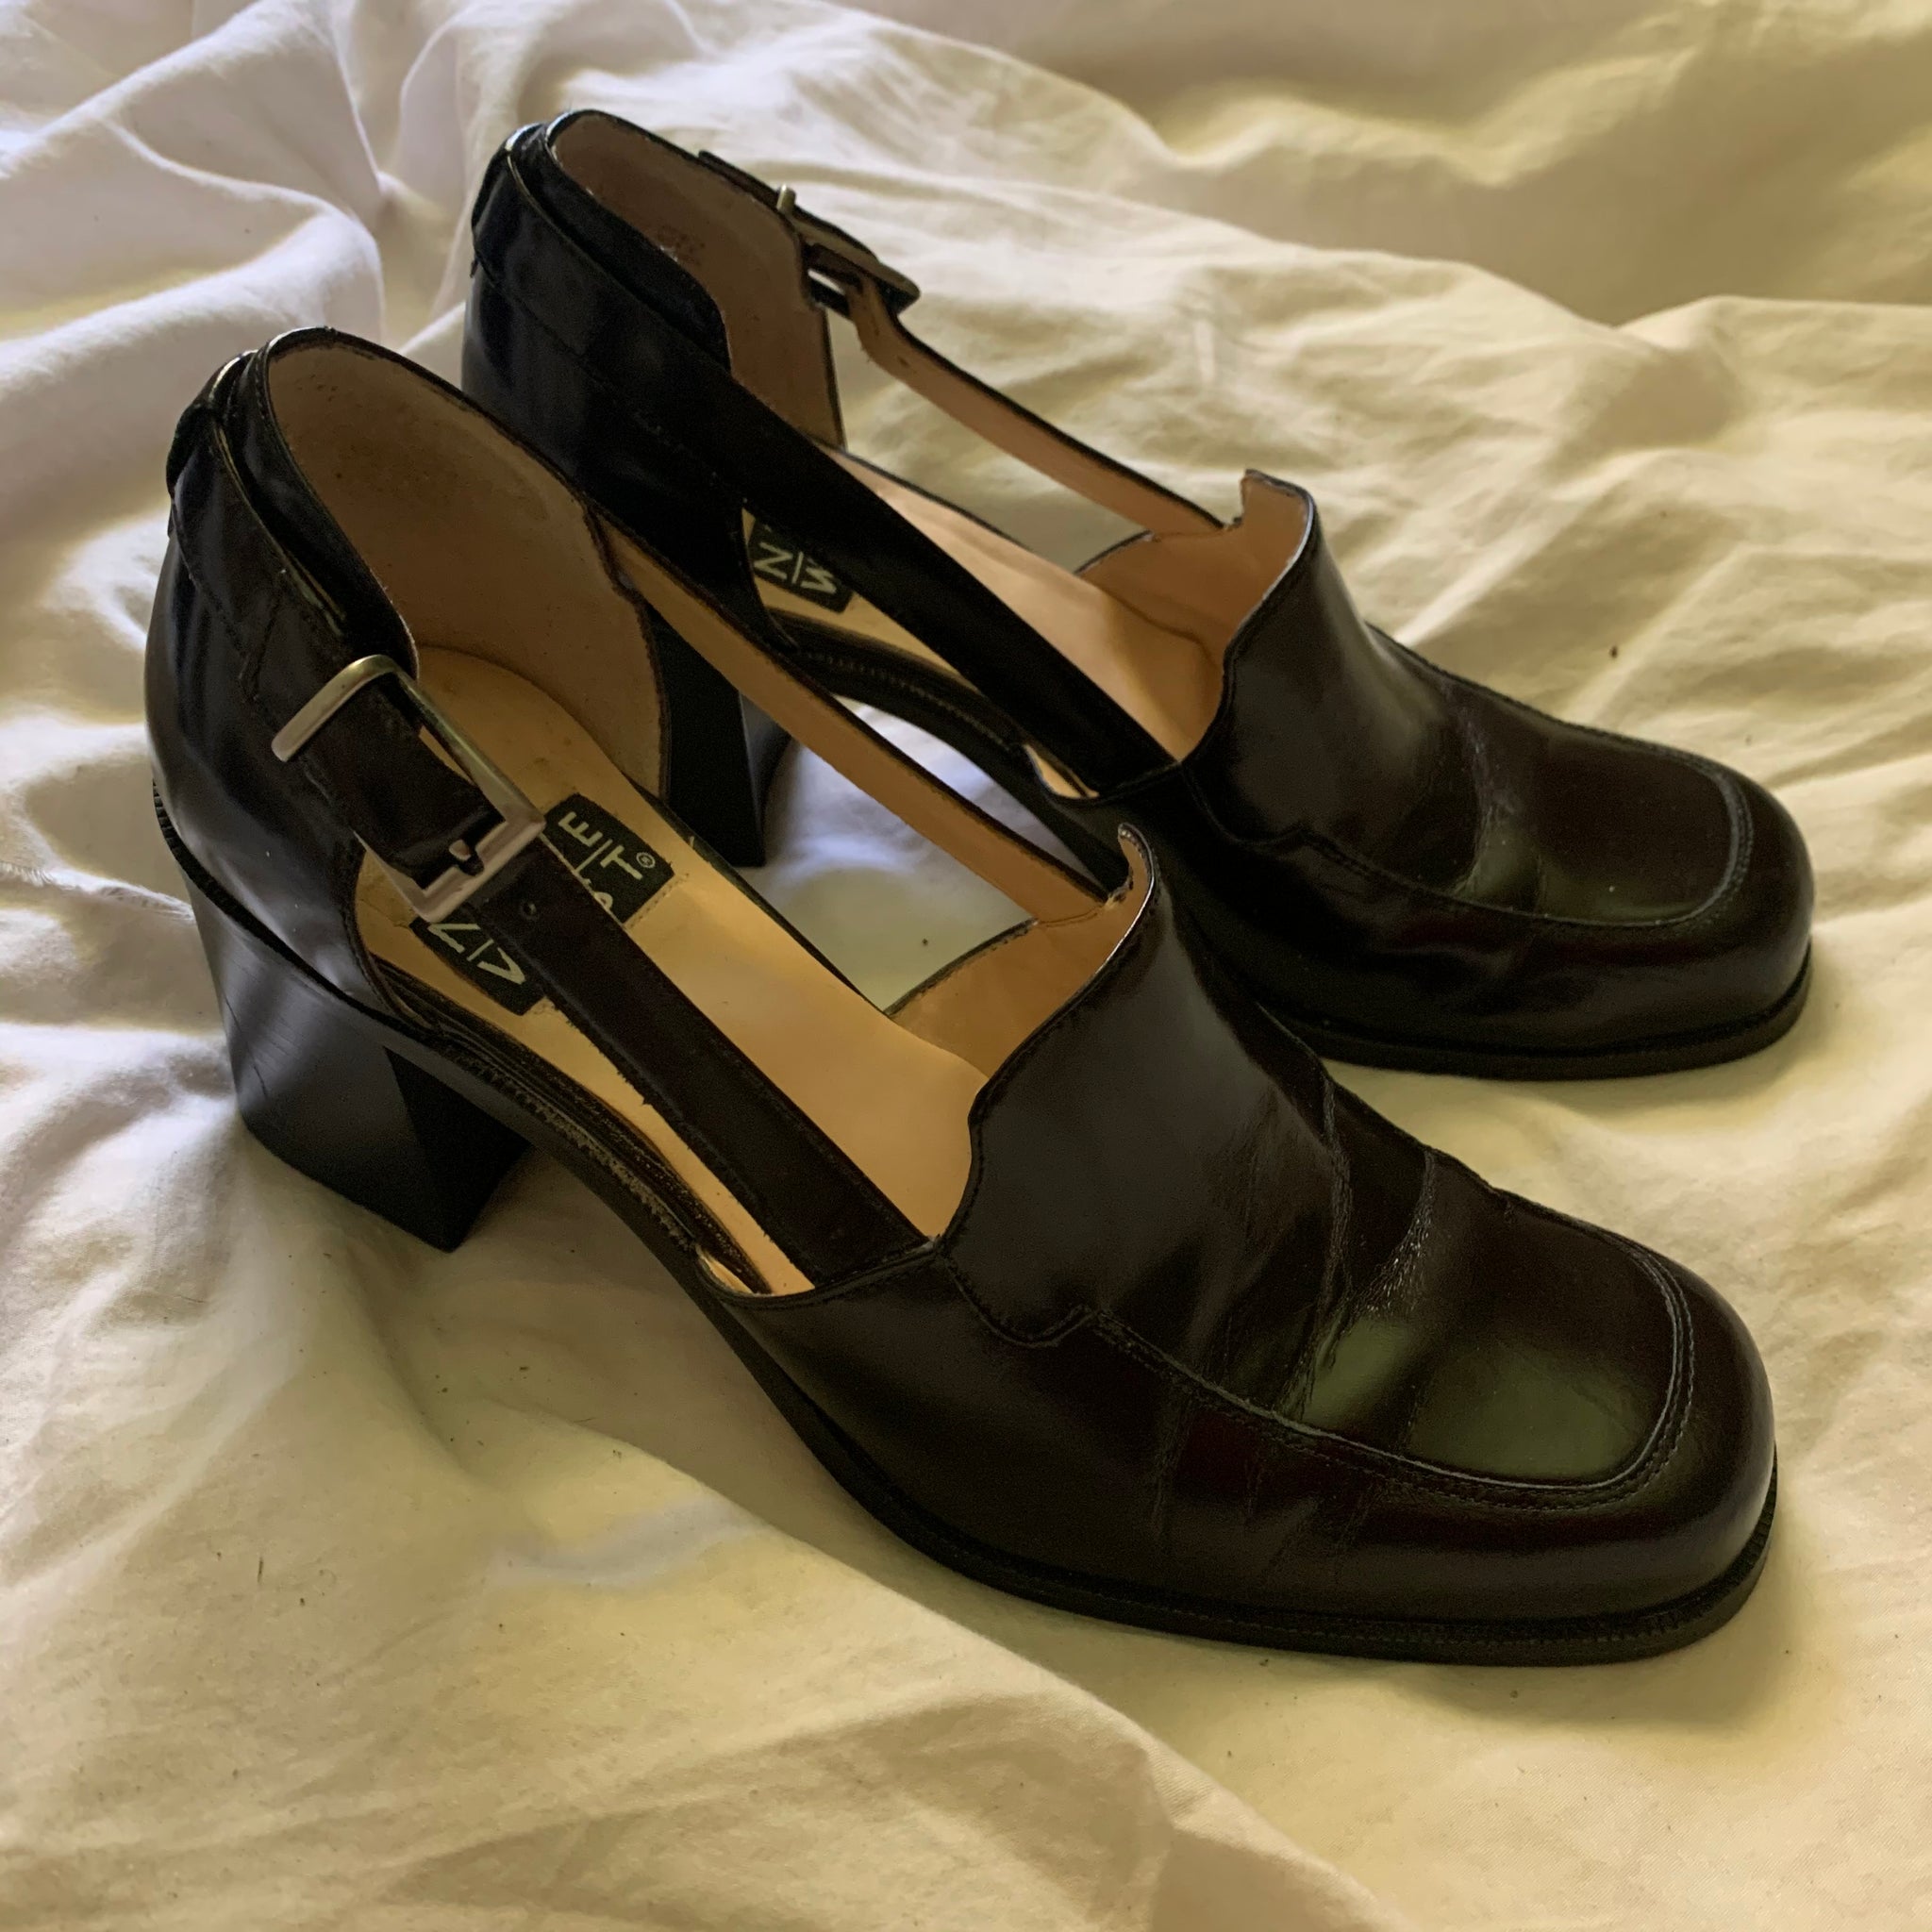 'Delia' Chunky Brown Leather Heeled Loafers w/ Cut-Outs (Sz. 7)